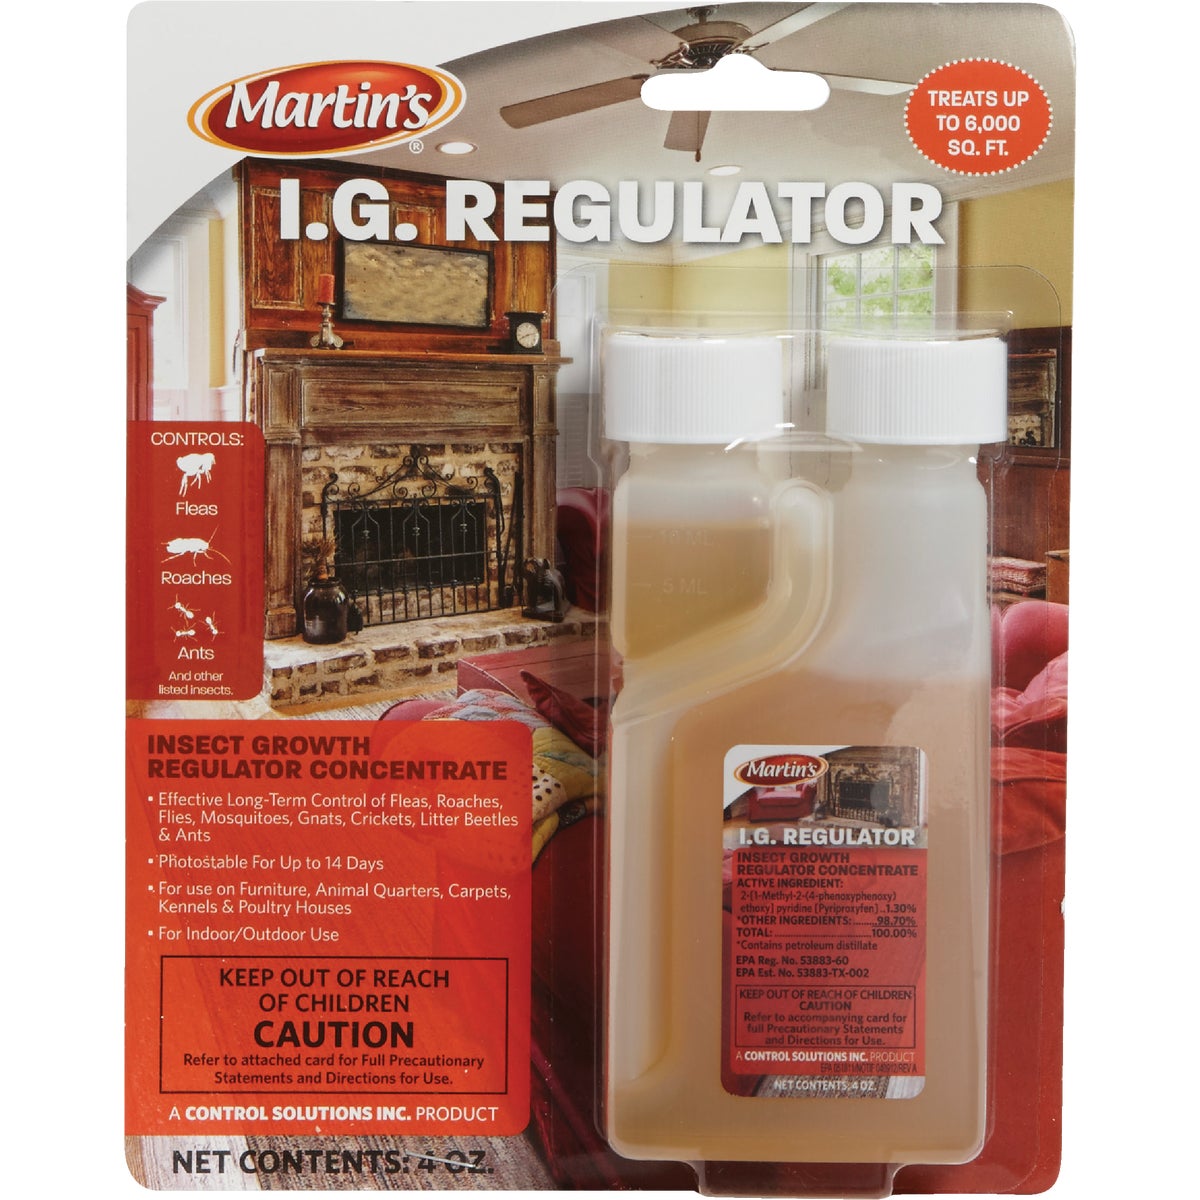 Item 704805, Insect growth regulator inhibits reinfestation of fleas for up to 7 months